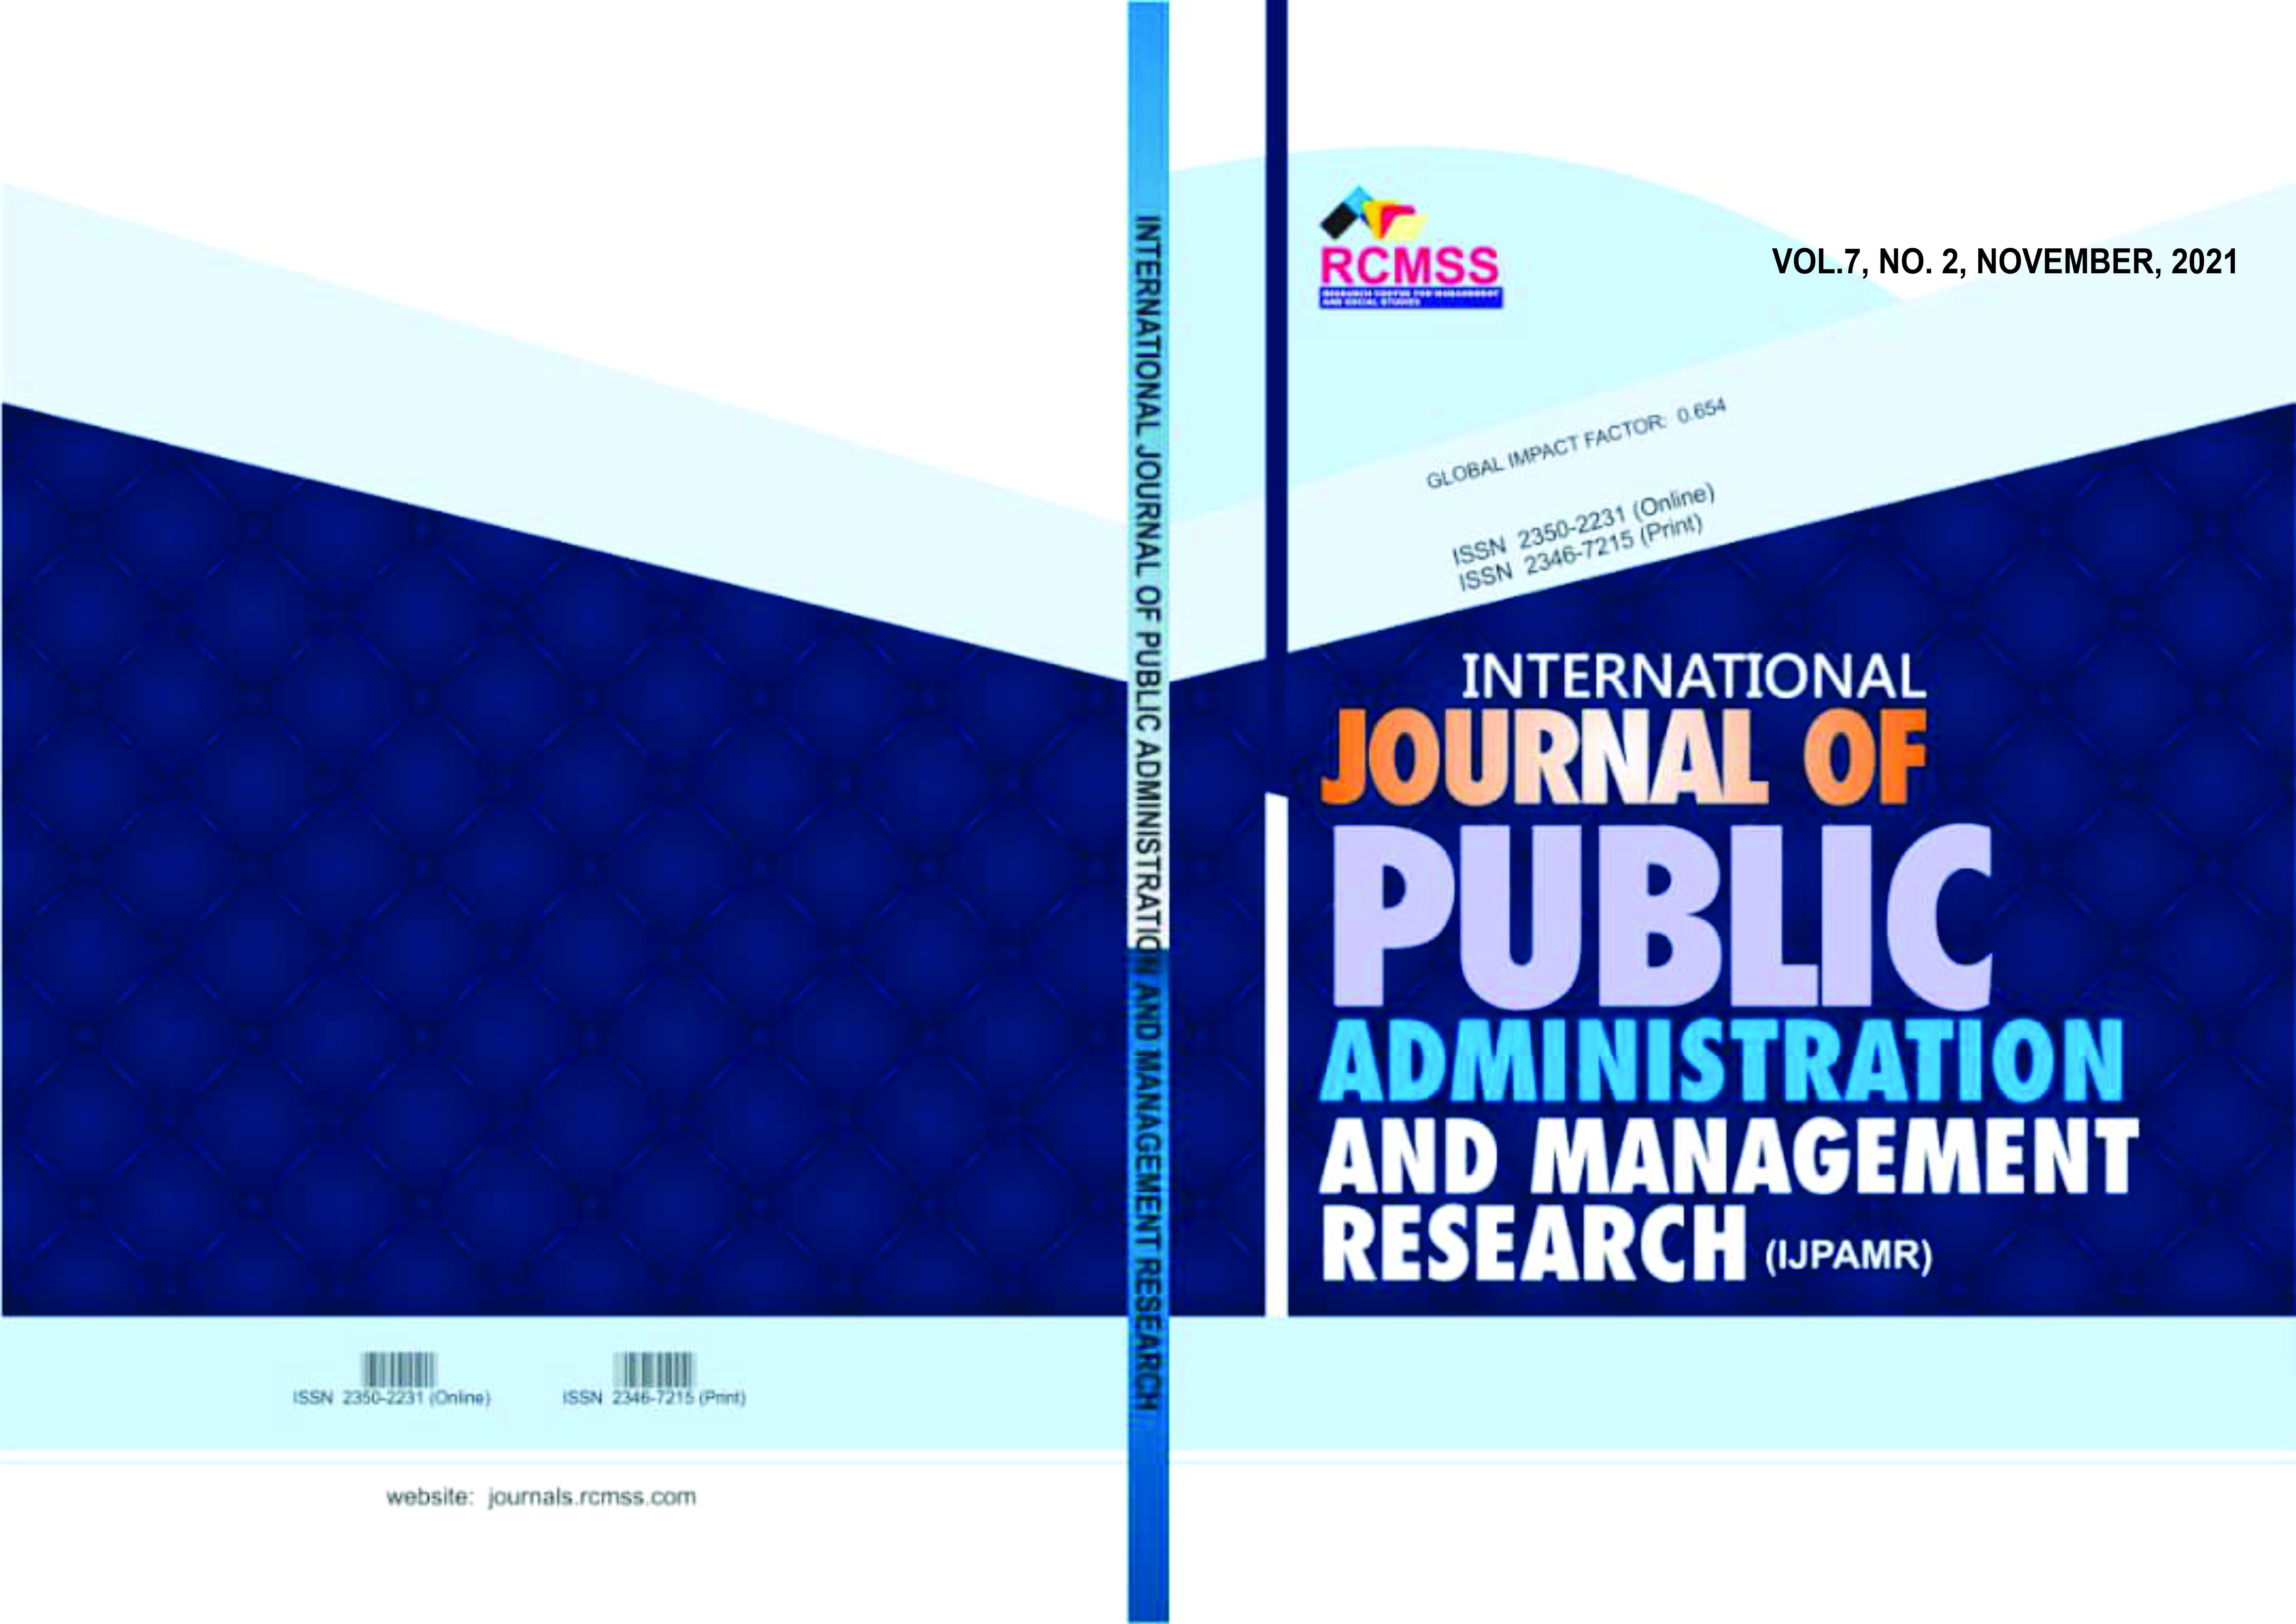 					View Vol. 7 No. 2 (2021): International Journal of Public Administration and Management Research (IJPAMR)
				